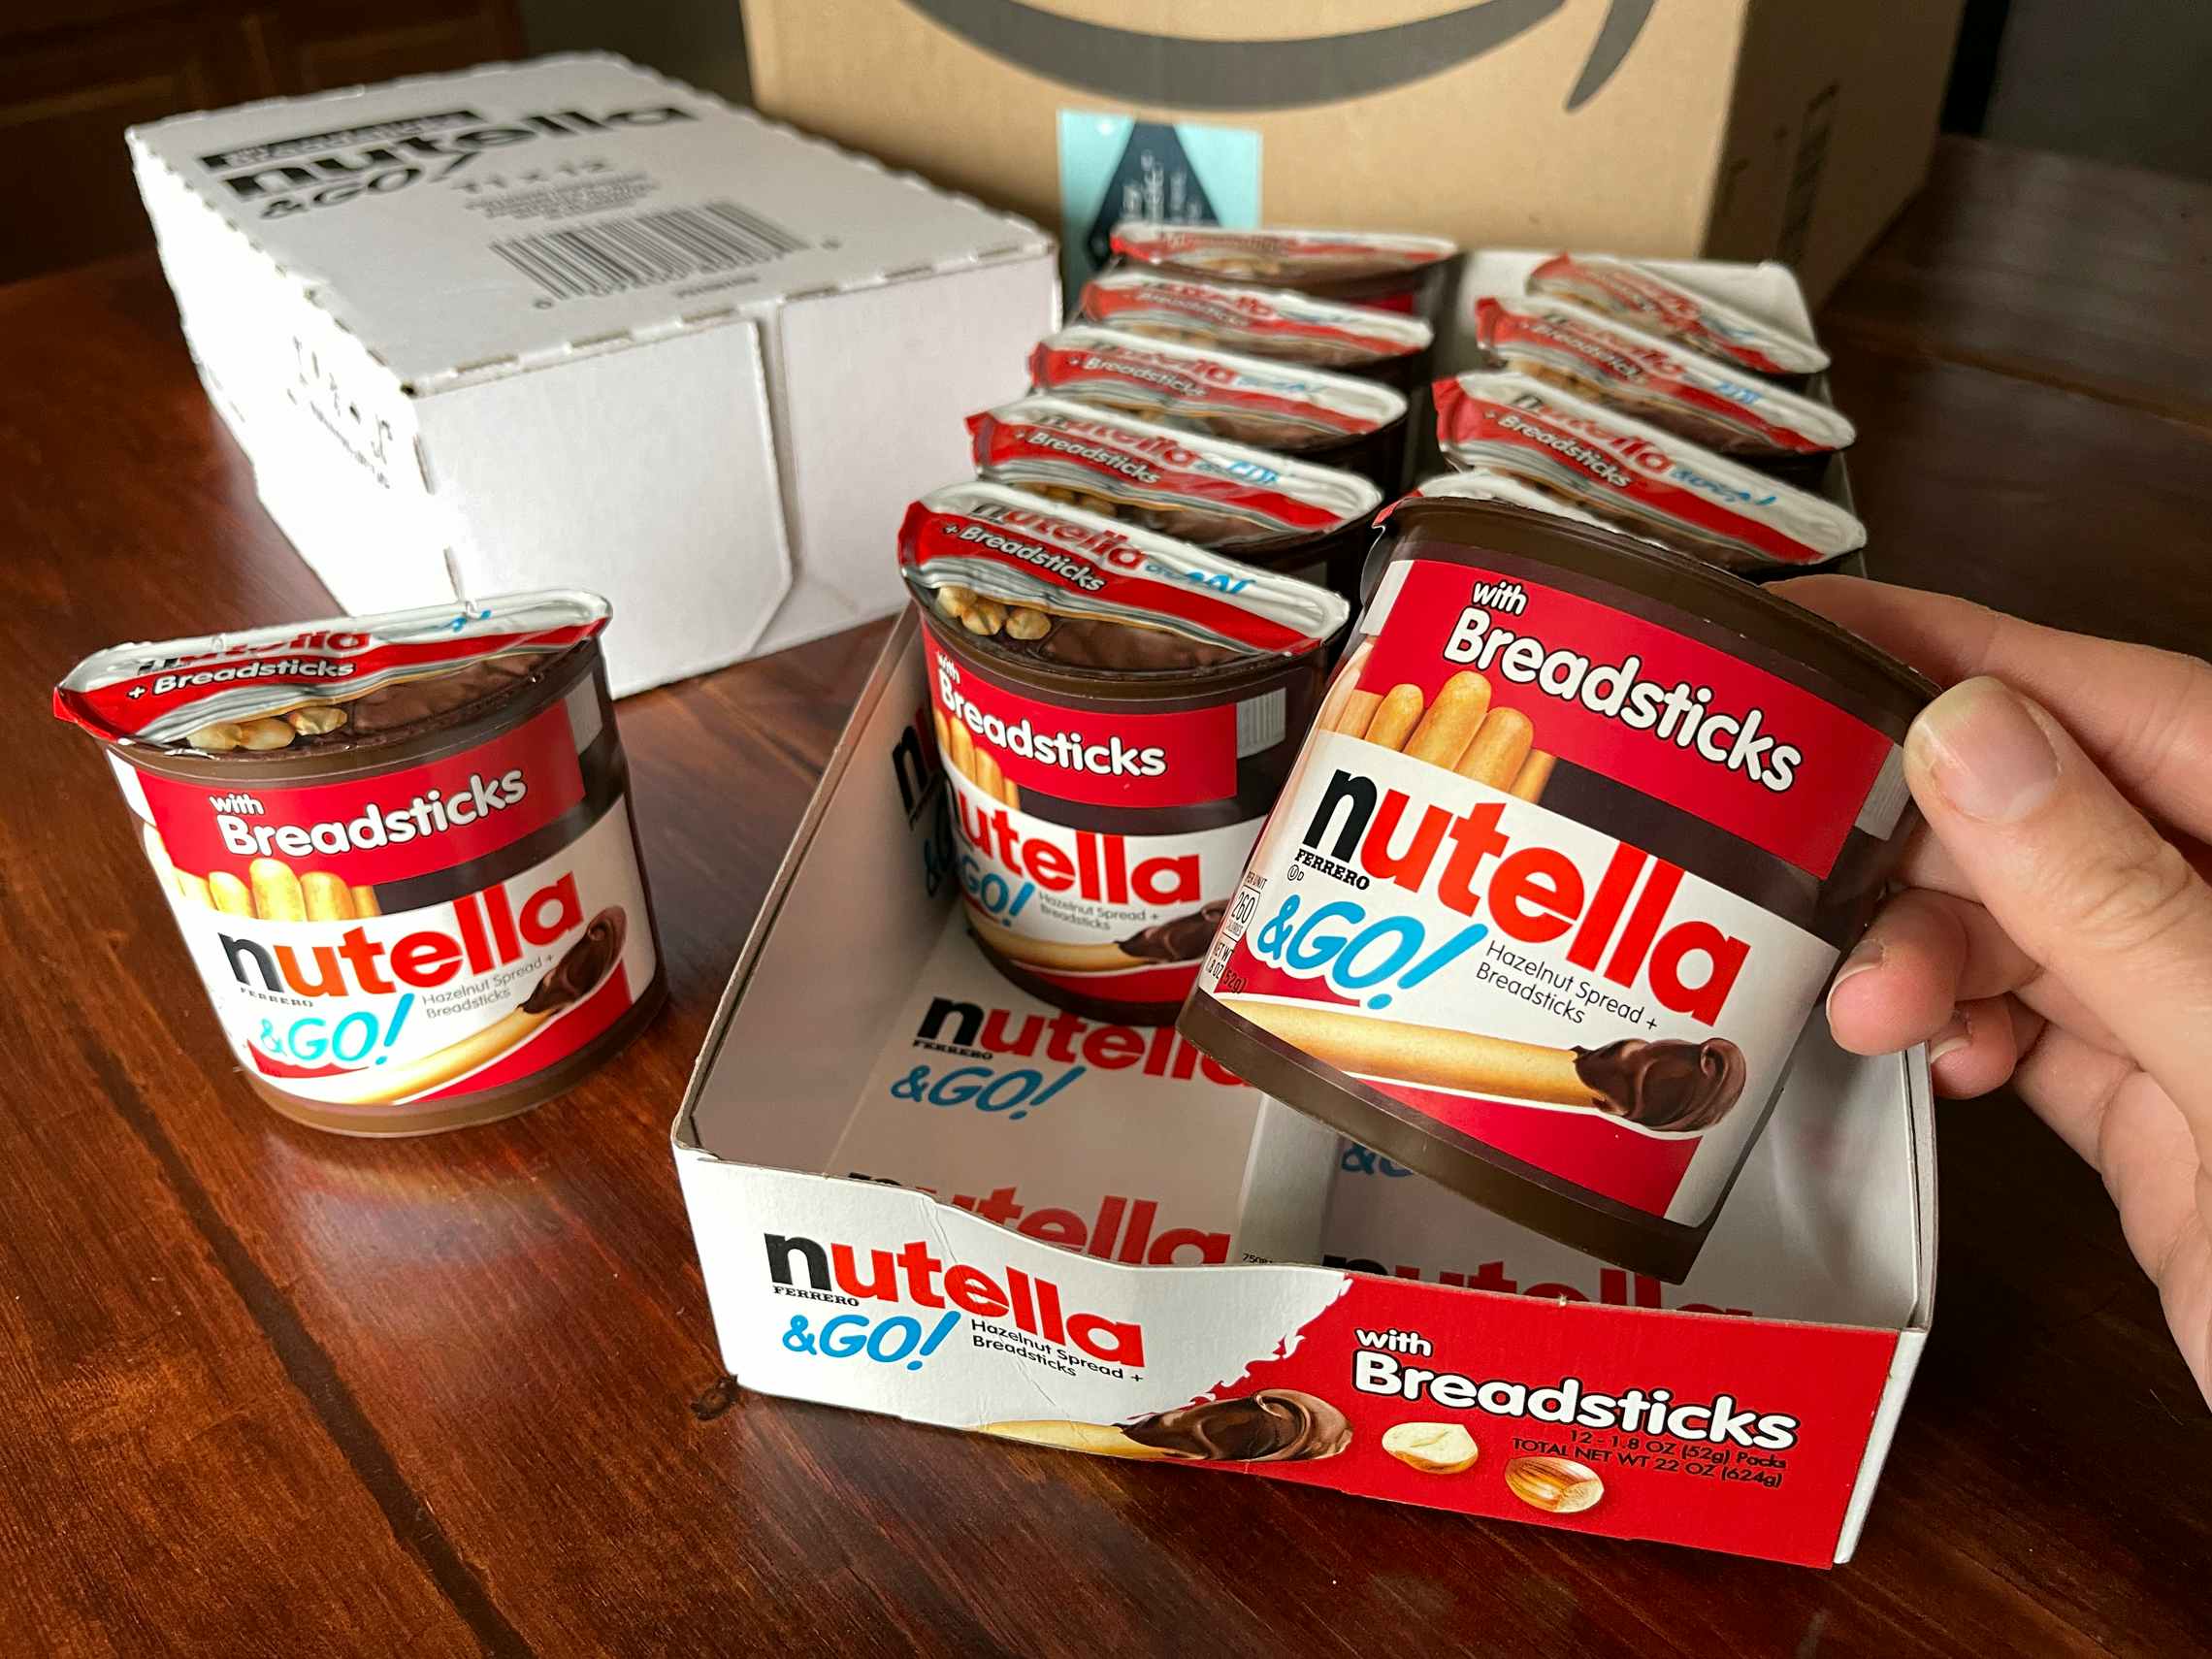 Nutella & Go Bulk Packs, as Low as $0.65 per Cup on Amazon